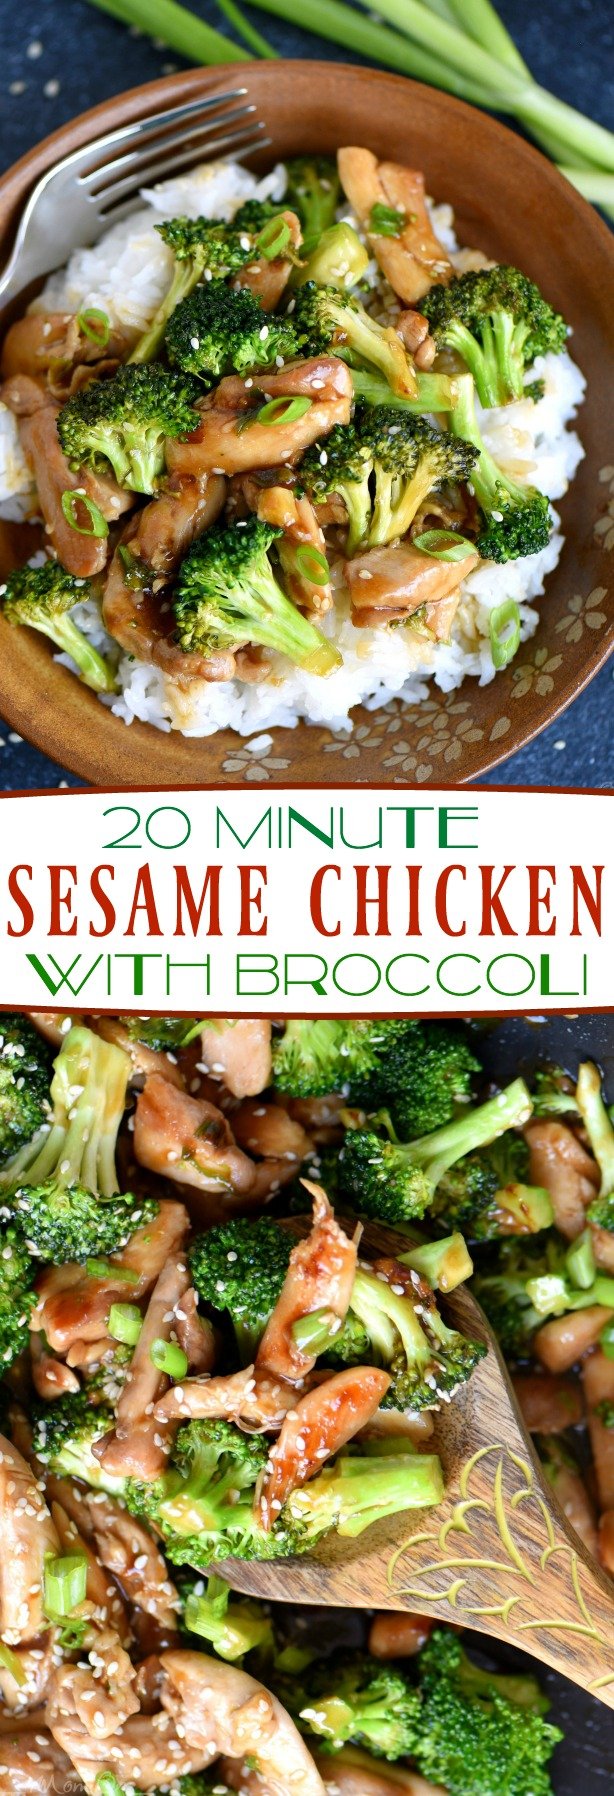 This easy 20 Minute Sesame Chicken with Broccoli is going to quickly become your favorite go-to easy dinner! Serve over white or brown rice for a perfect meal! So much better than takeout! // Mom On Timeout